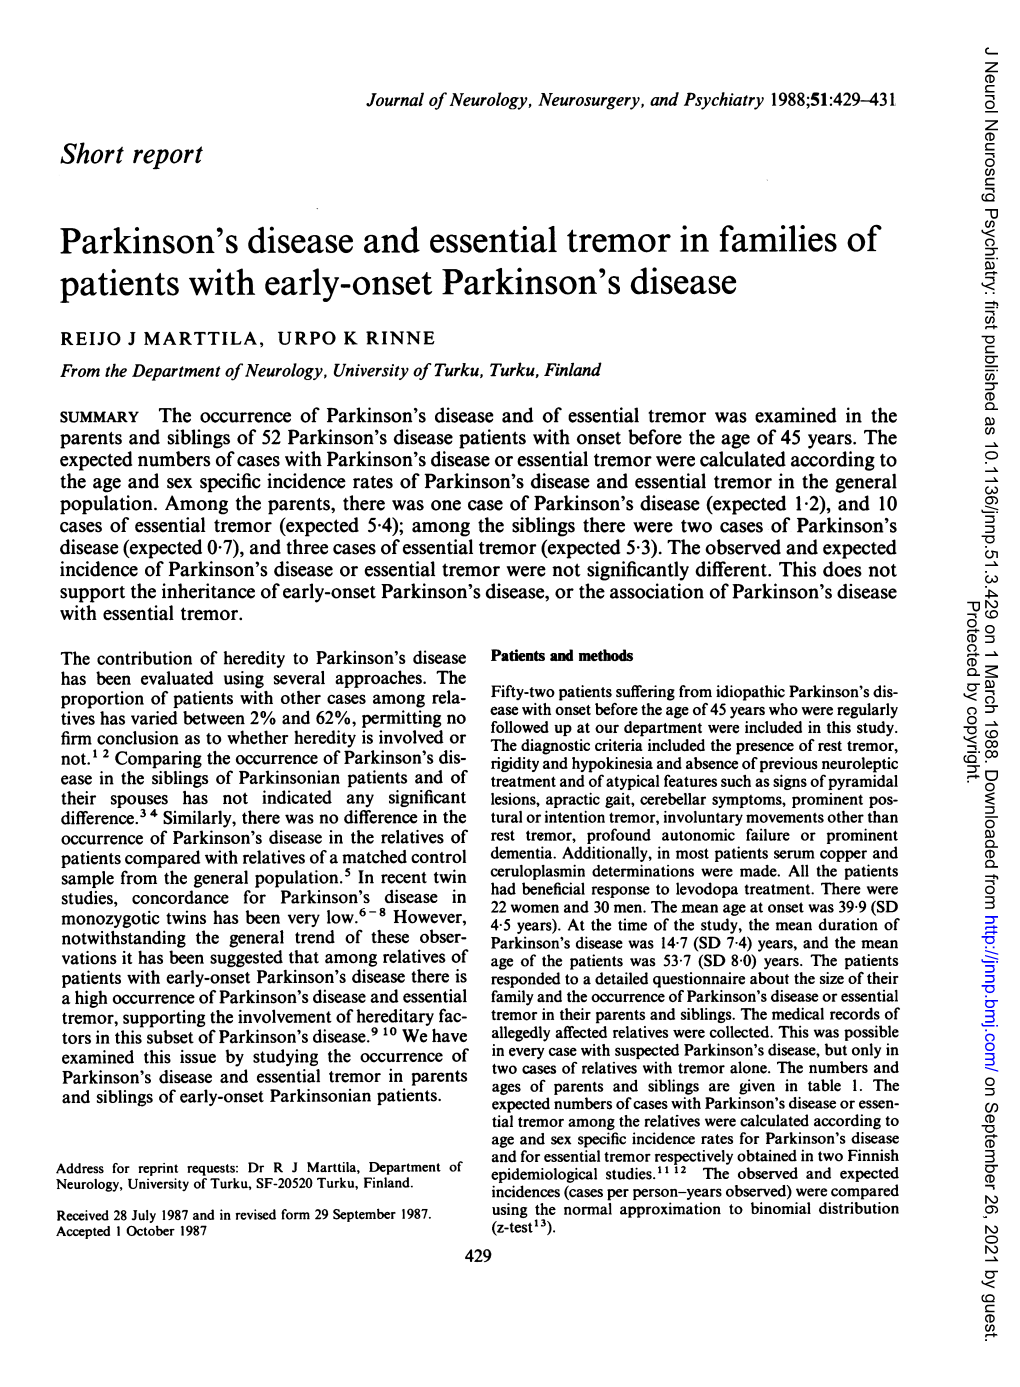 Parkinson's Disease and Essential Tremor in Families of Patients with Early-Onset Parkinson's Disease